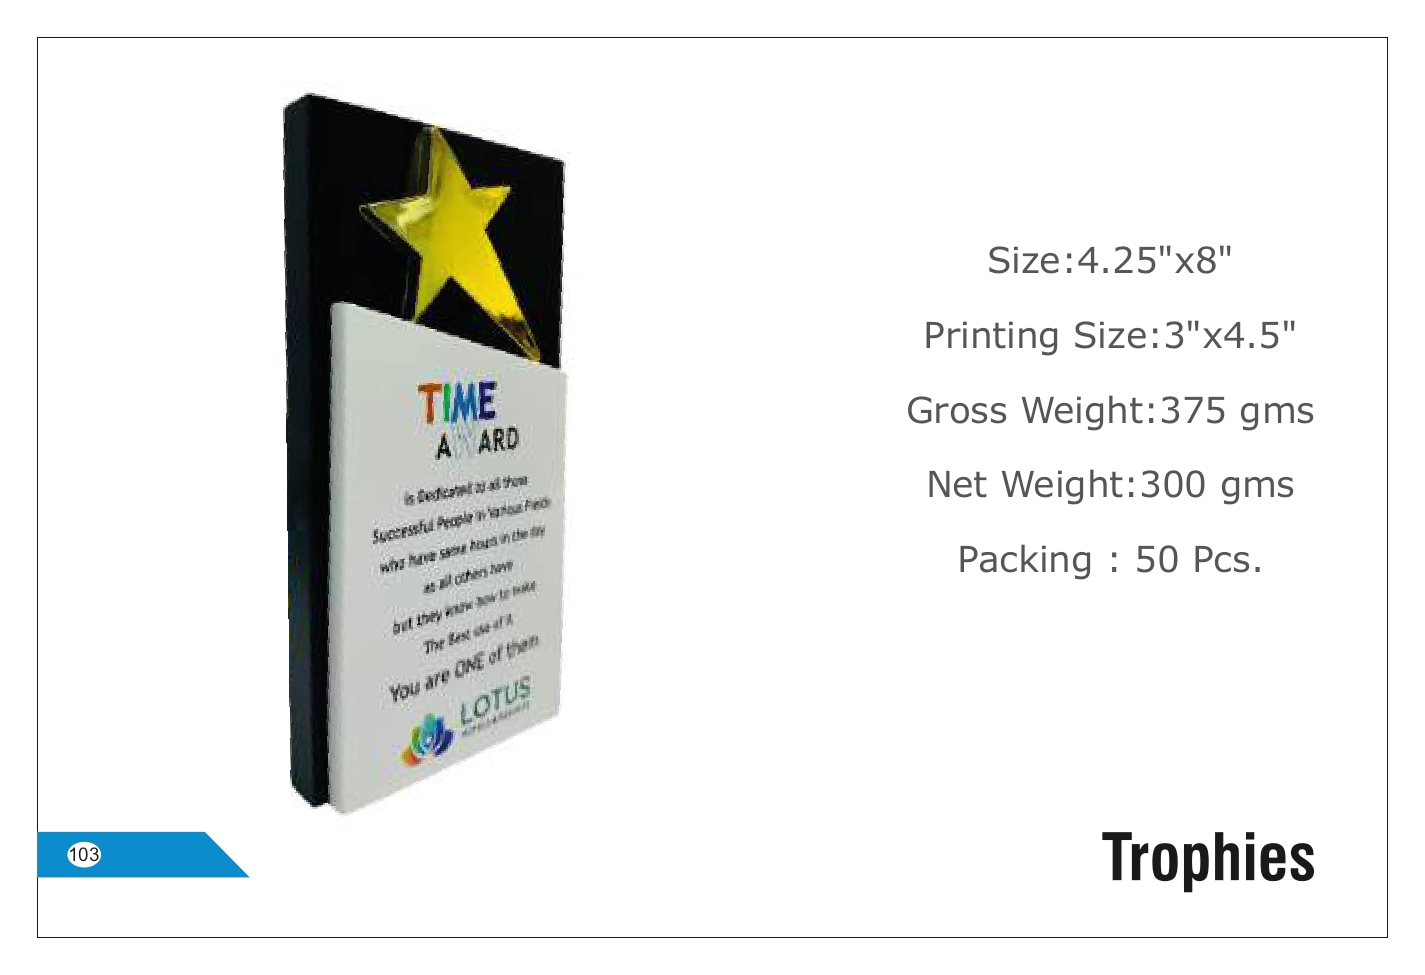 Compact Recognition Trophy with Customizable Printing